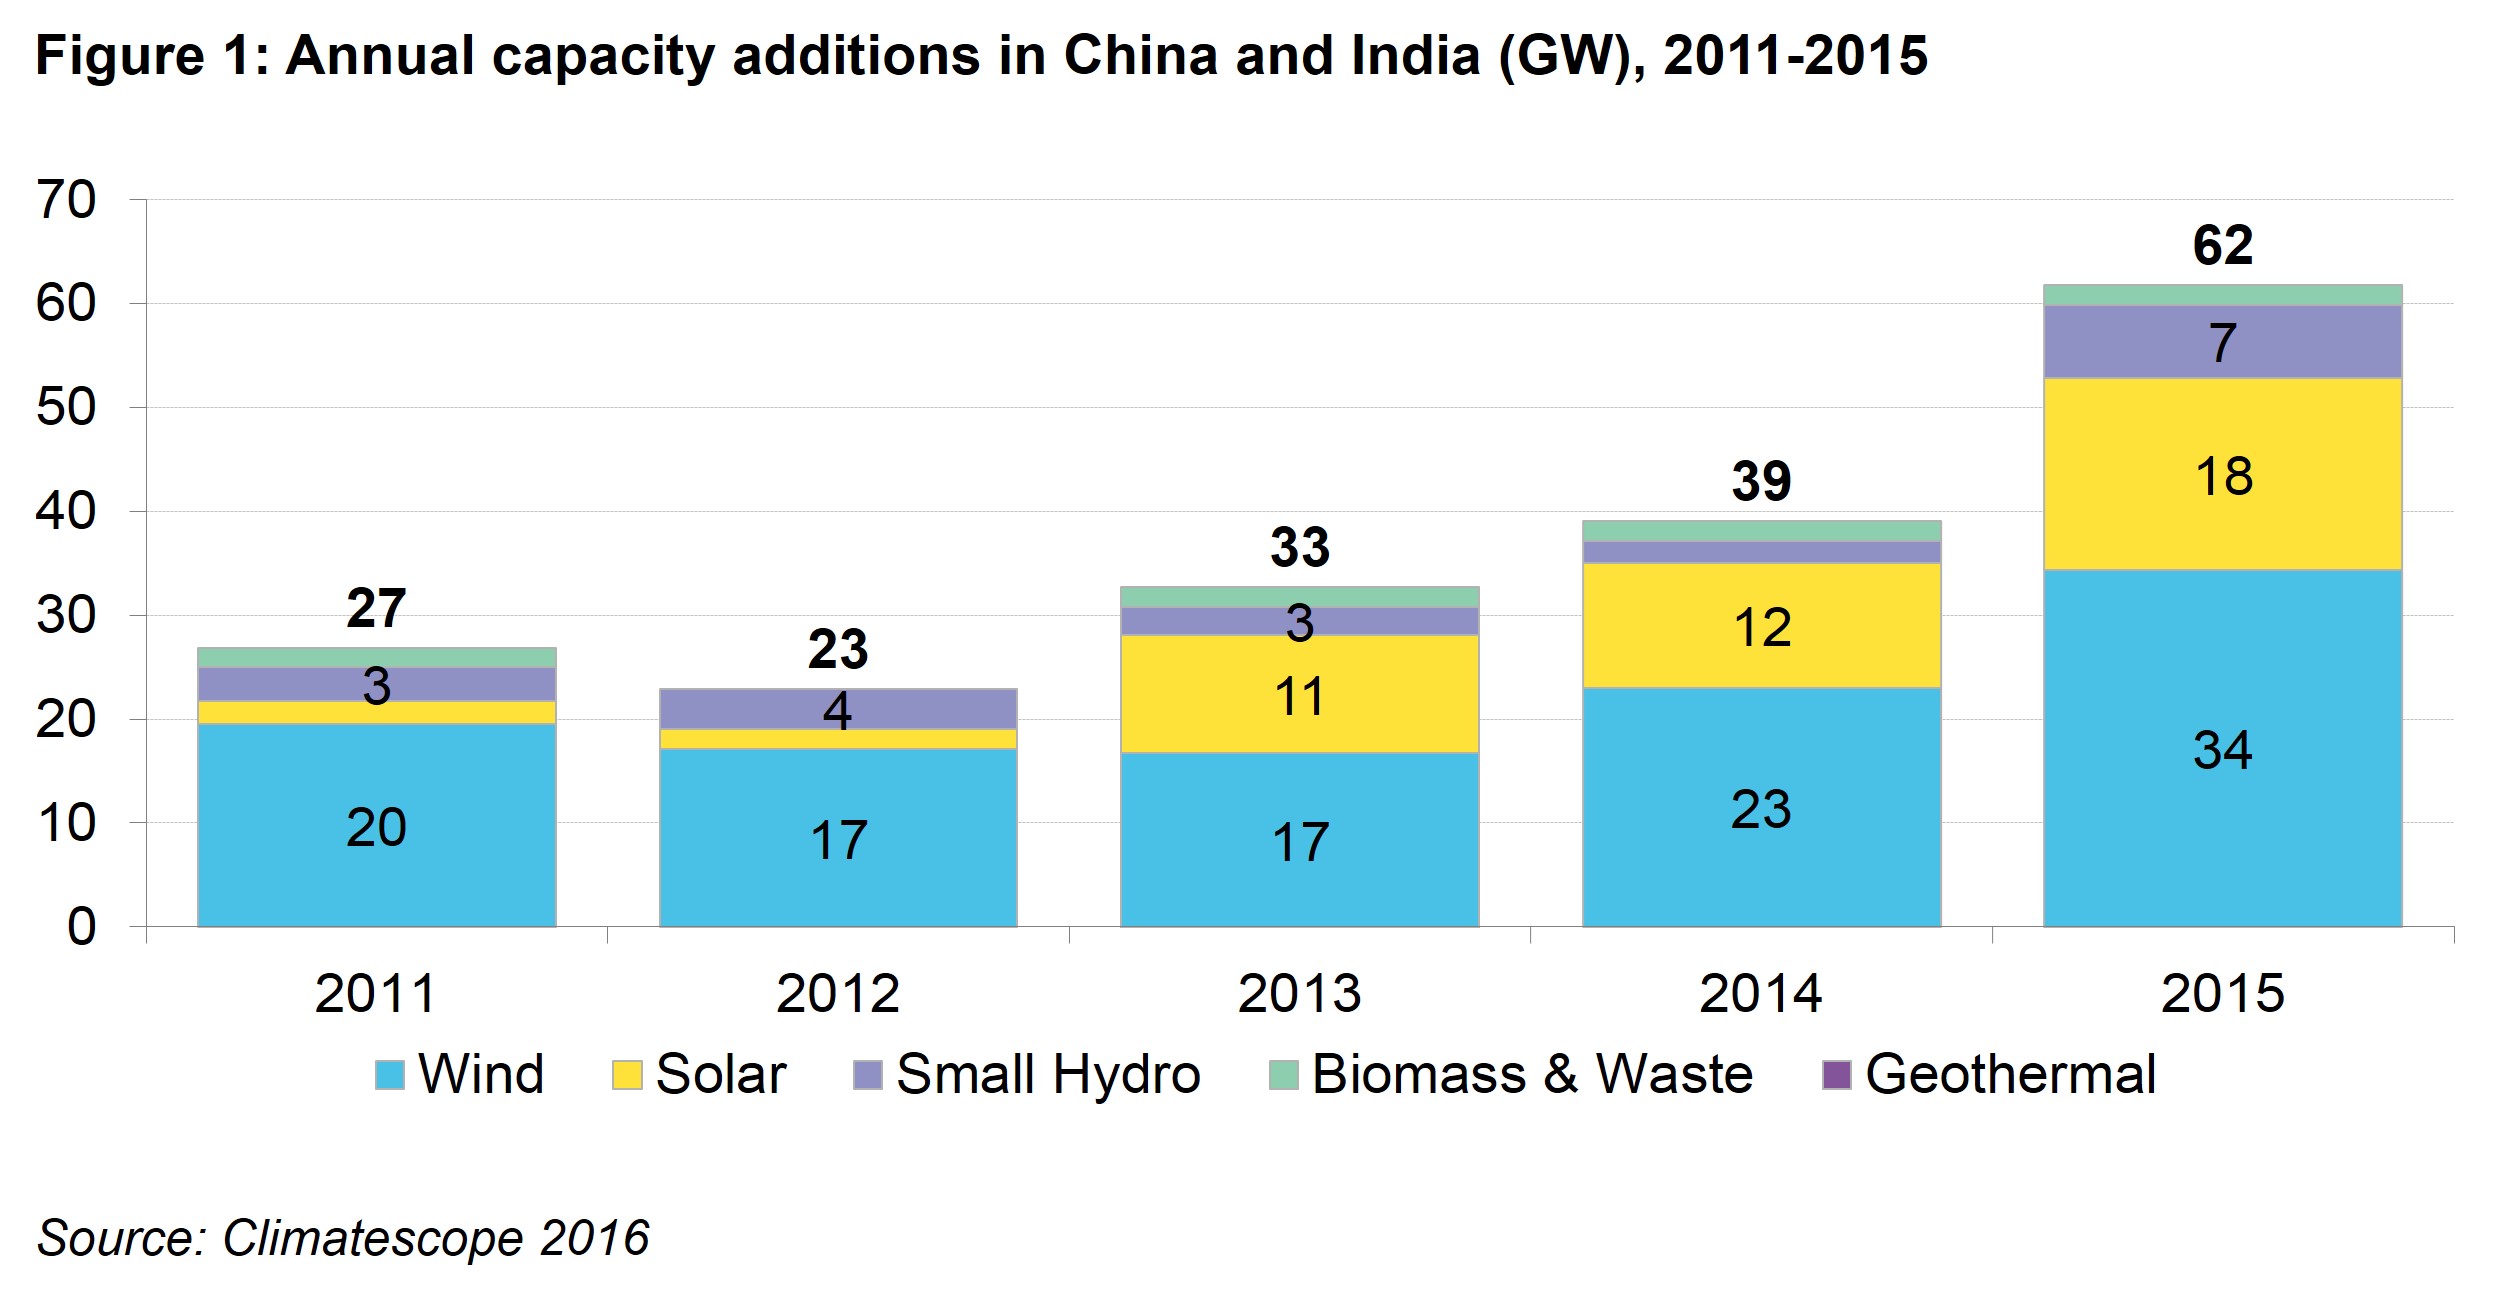 Asia Fig 1 - Annual capacity additions in China and India (GW), 2011-2015